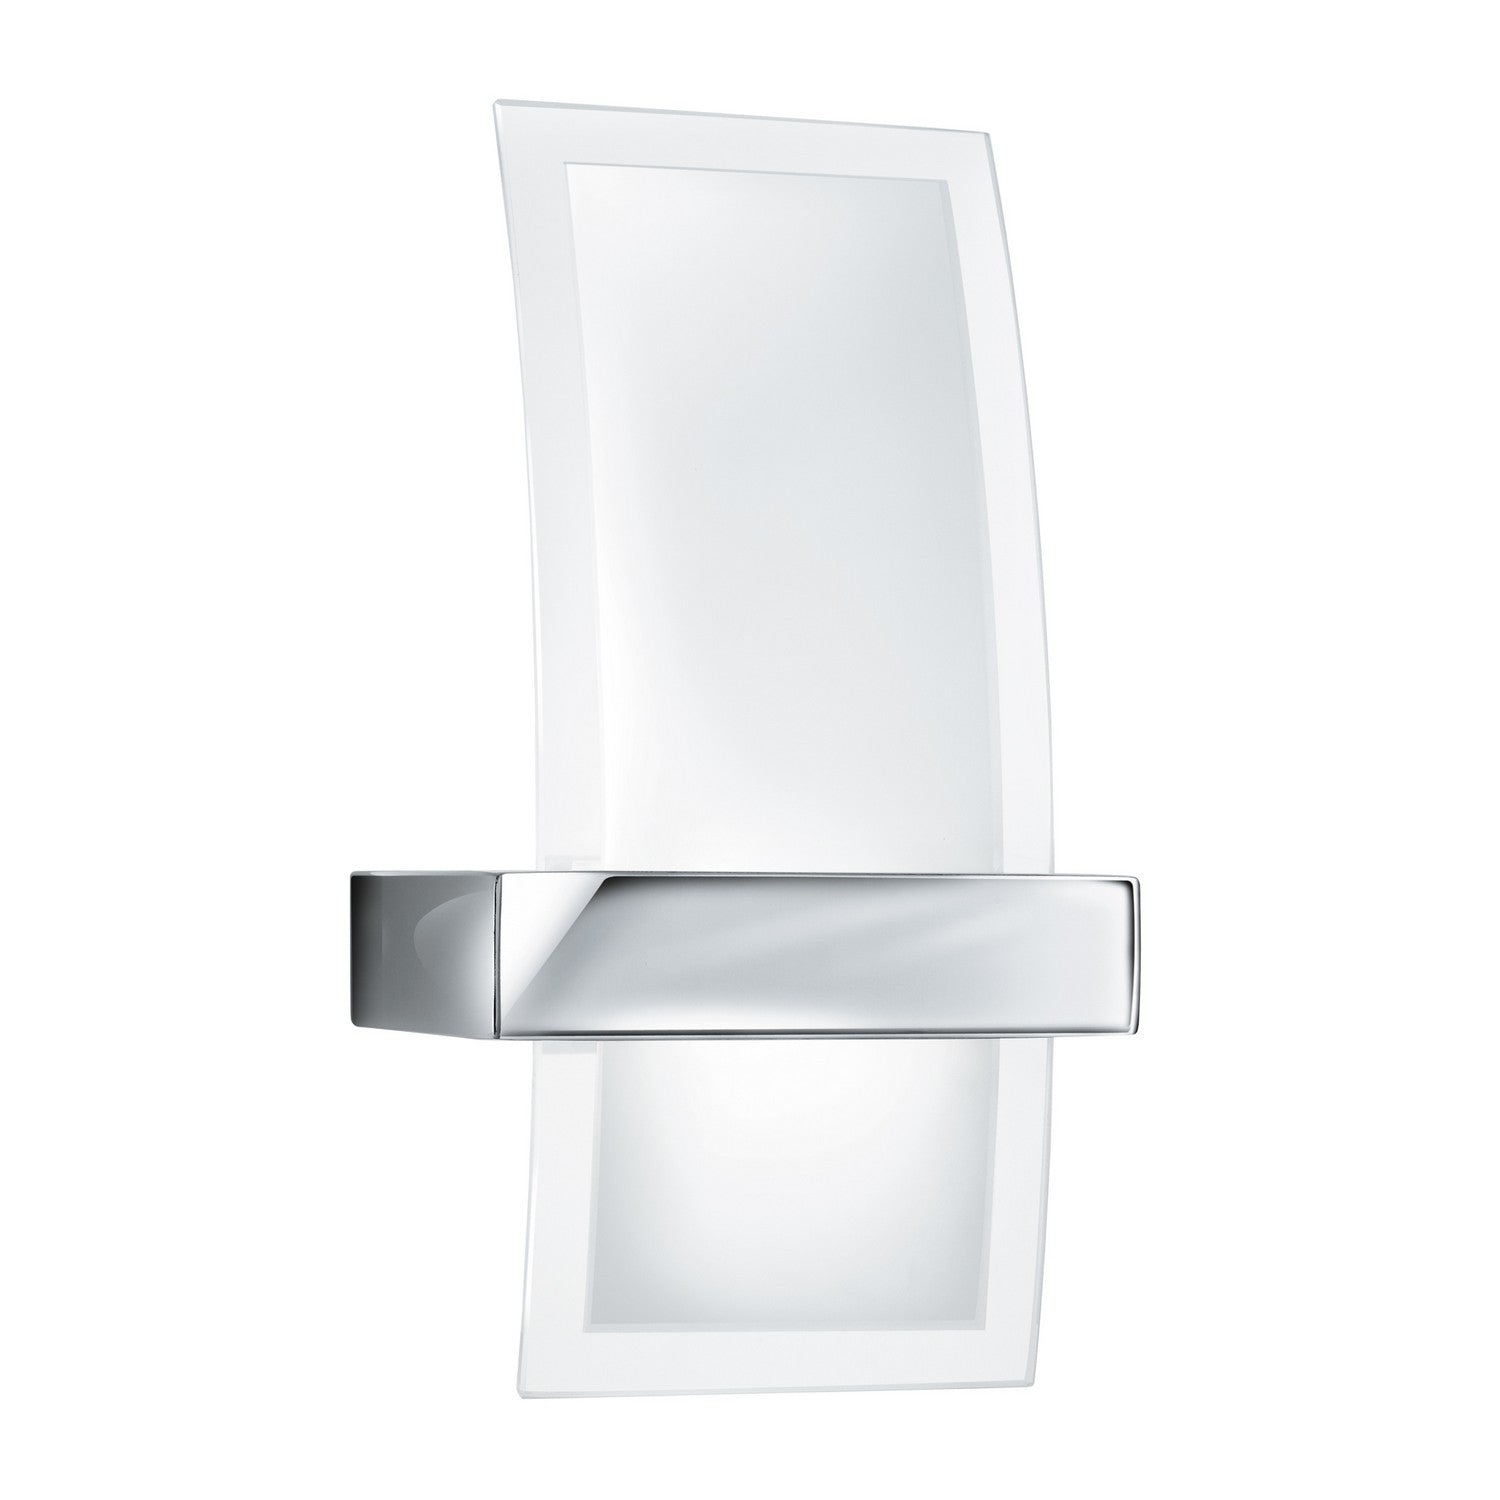 LED Chrome Curved Frosted Glass Wall Bracket Light Indoor Lighting